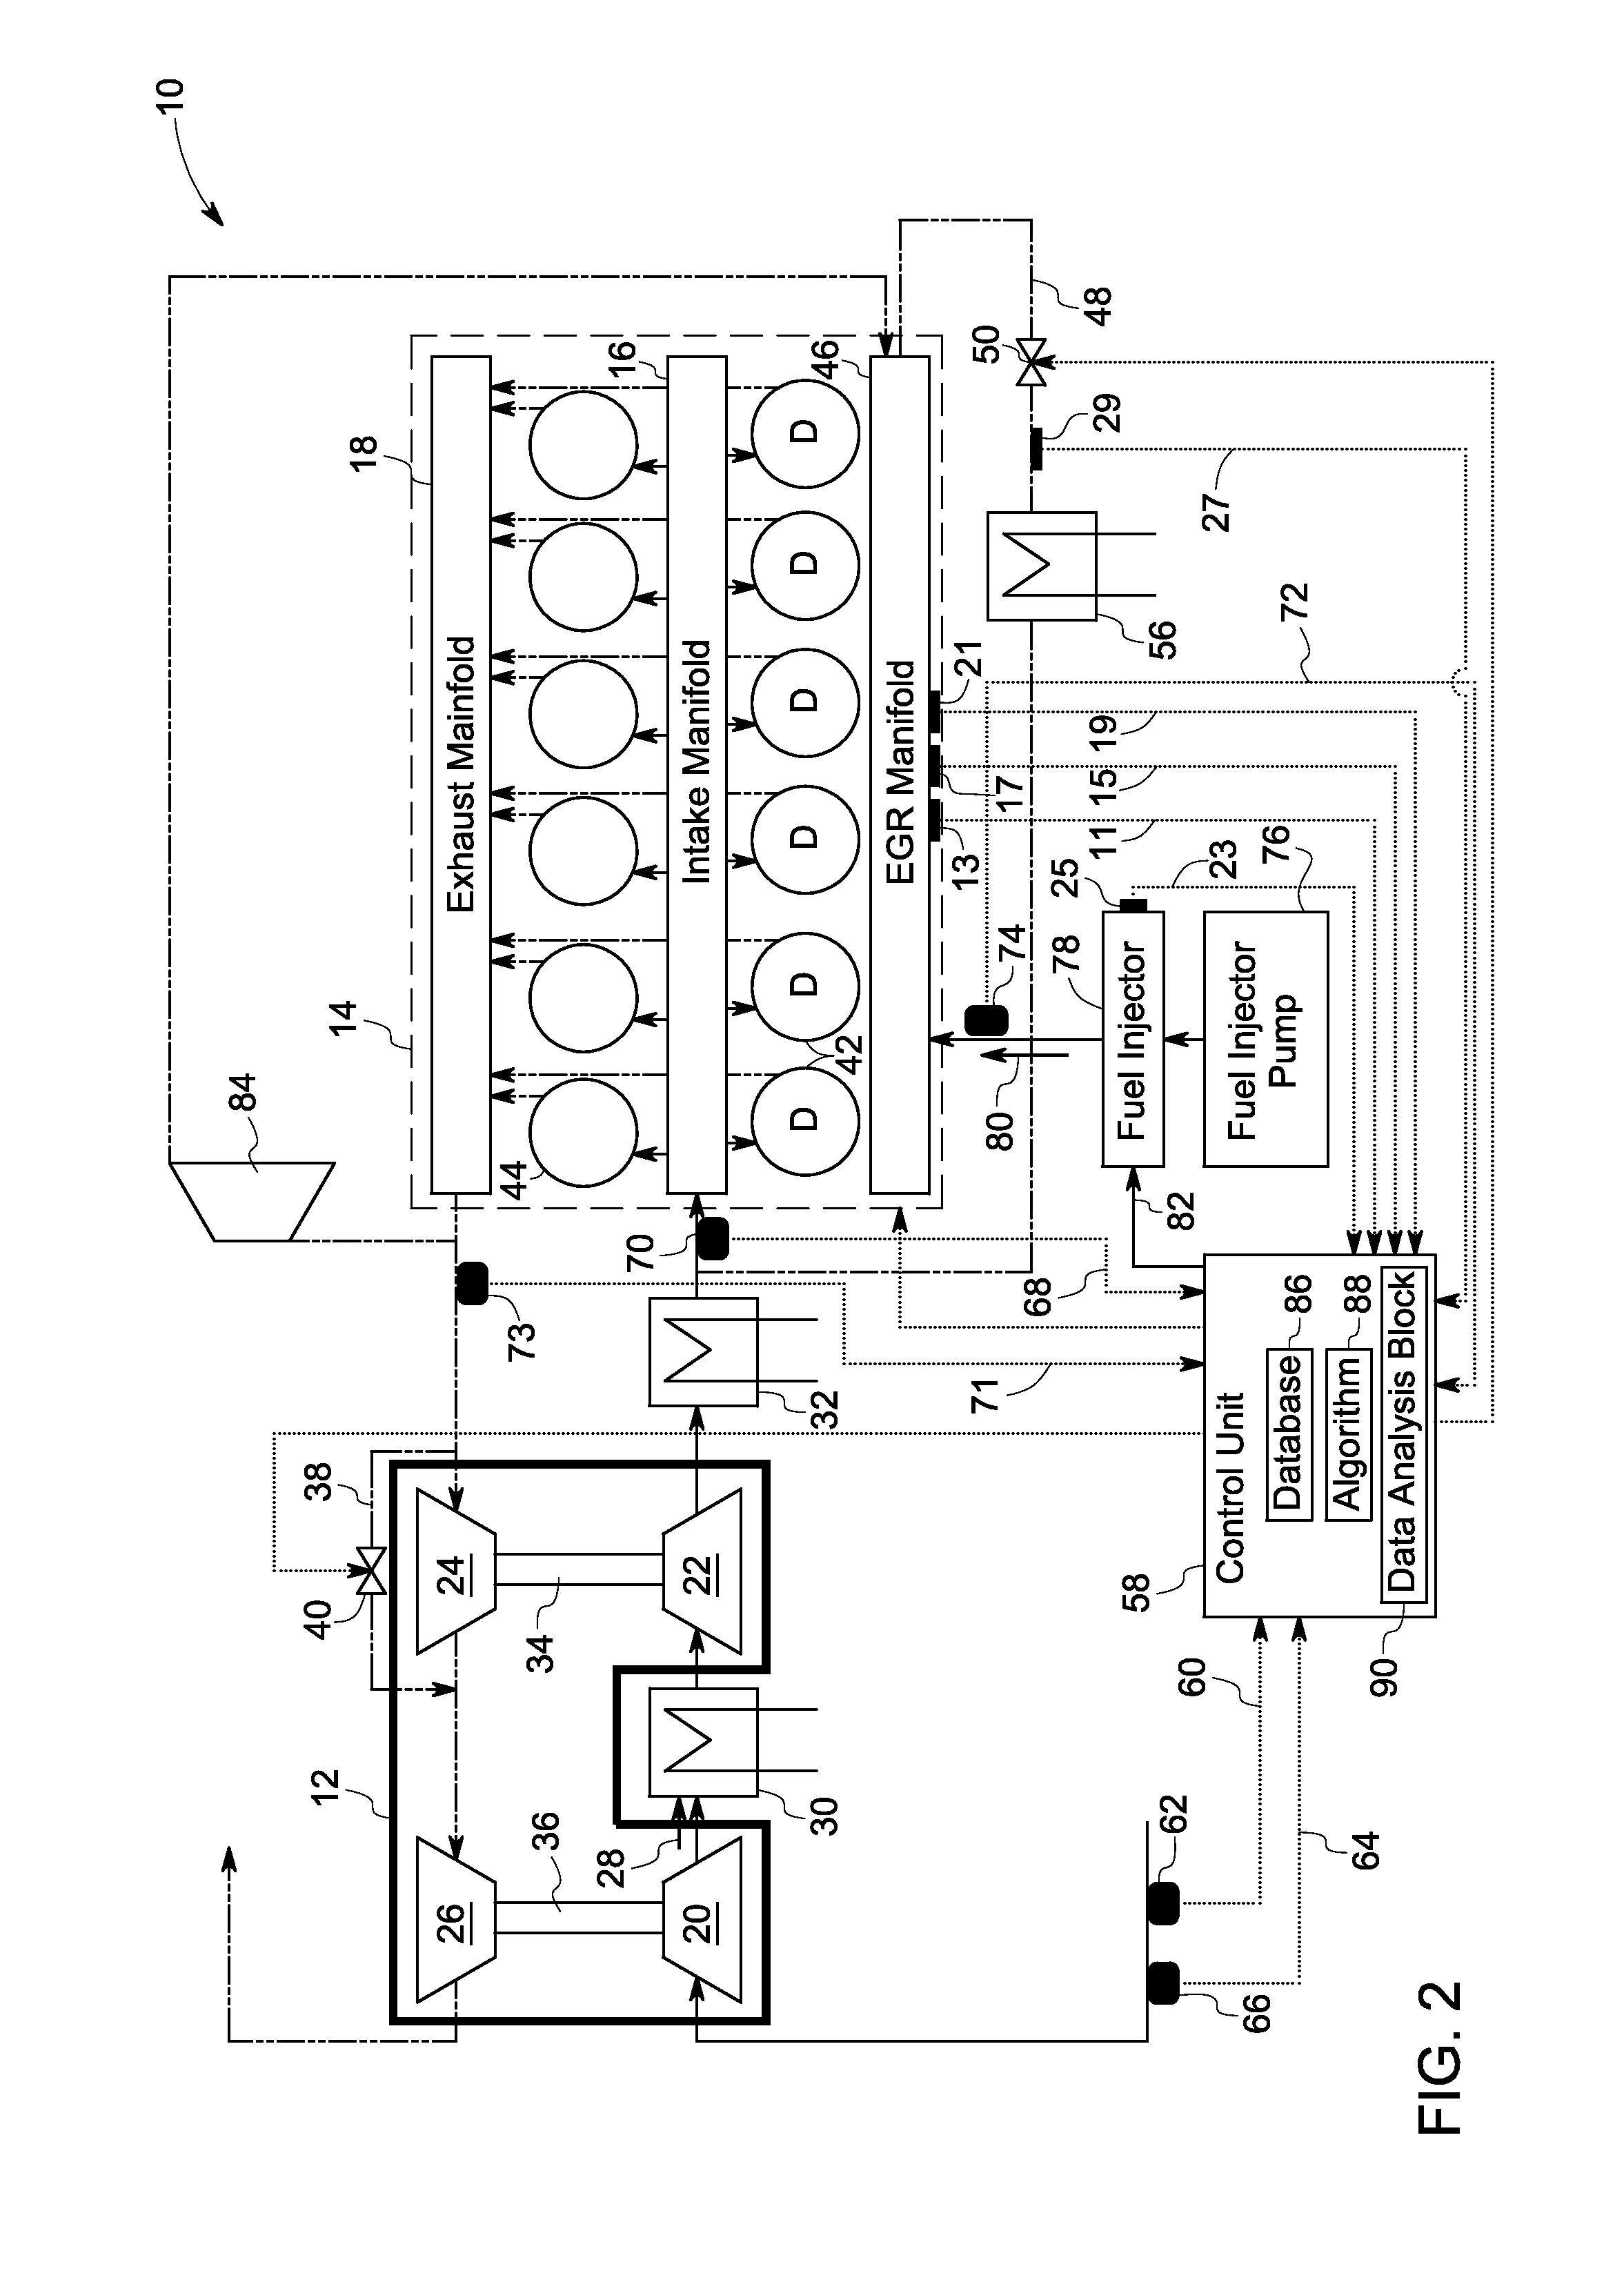 System and method for controlling exhaust emissions and specific fuel consumption of an engine